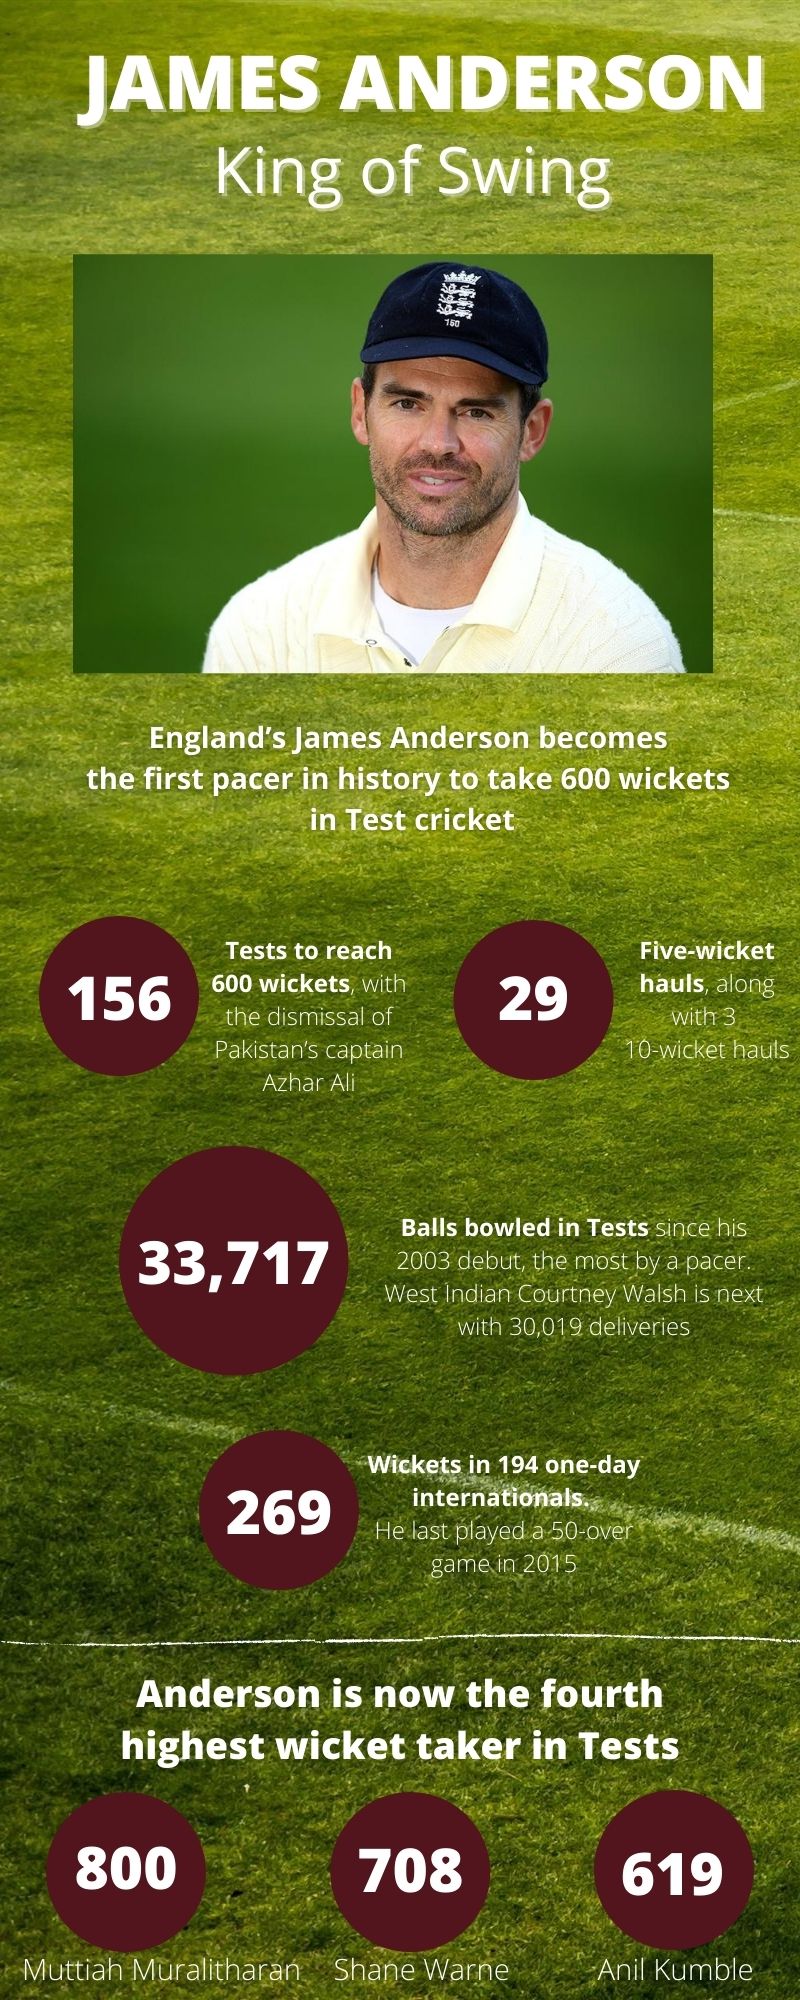 James Anderson becomes first pacer in history with 600 Test wickets